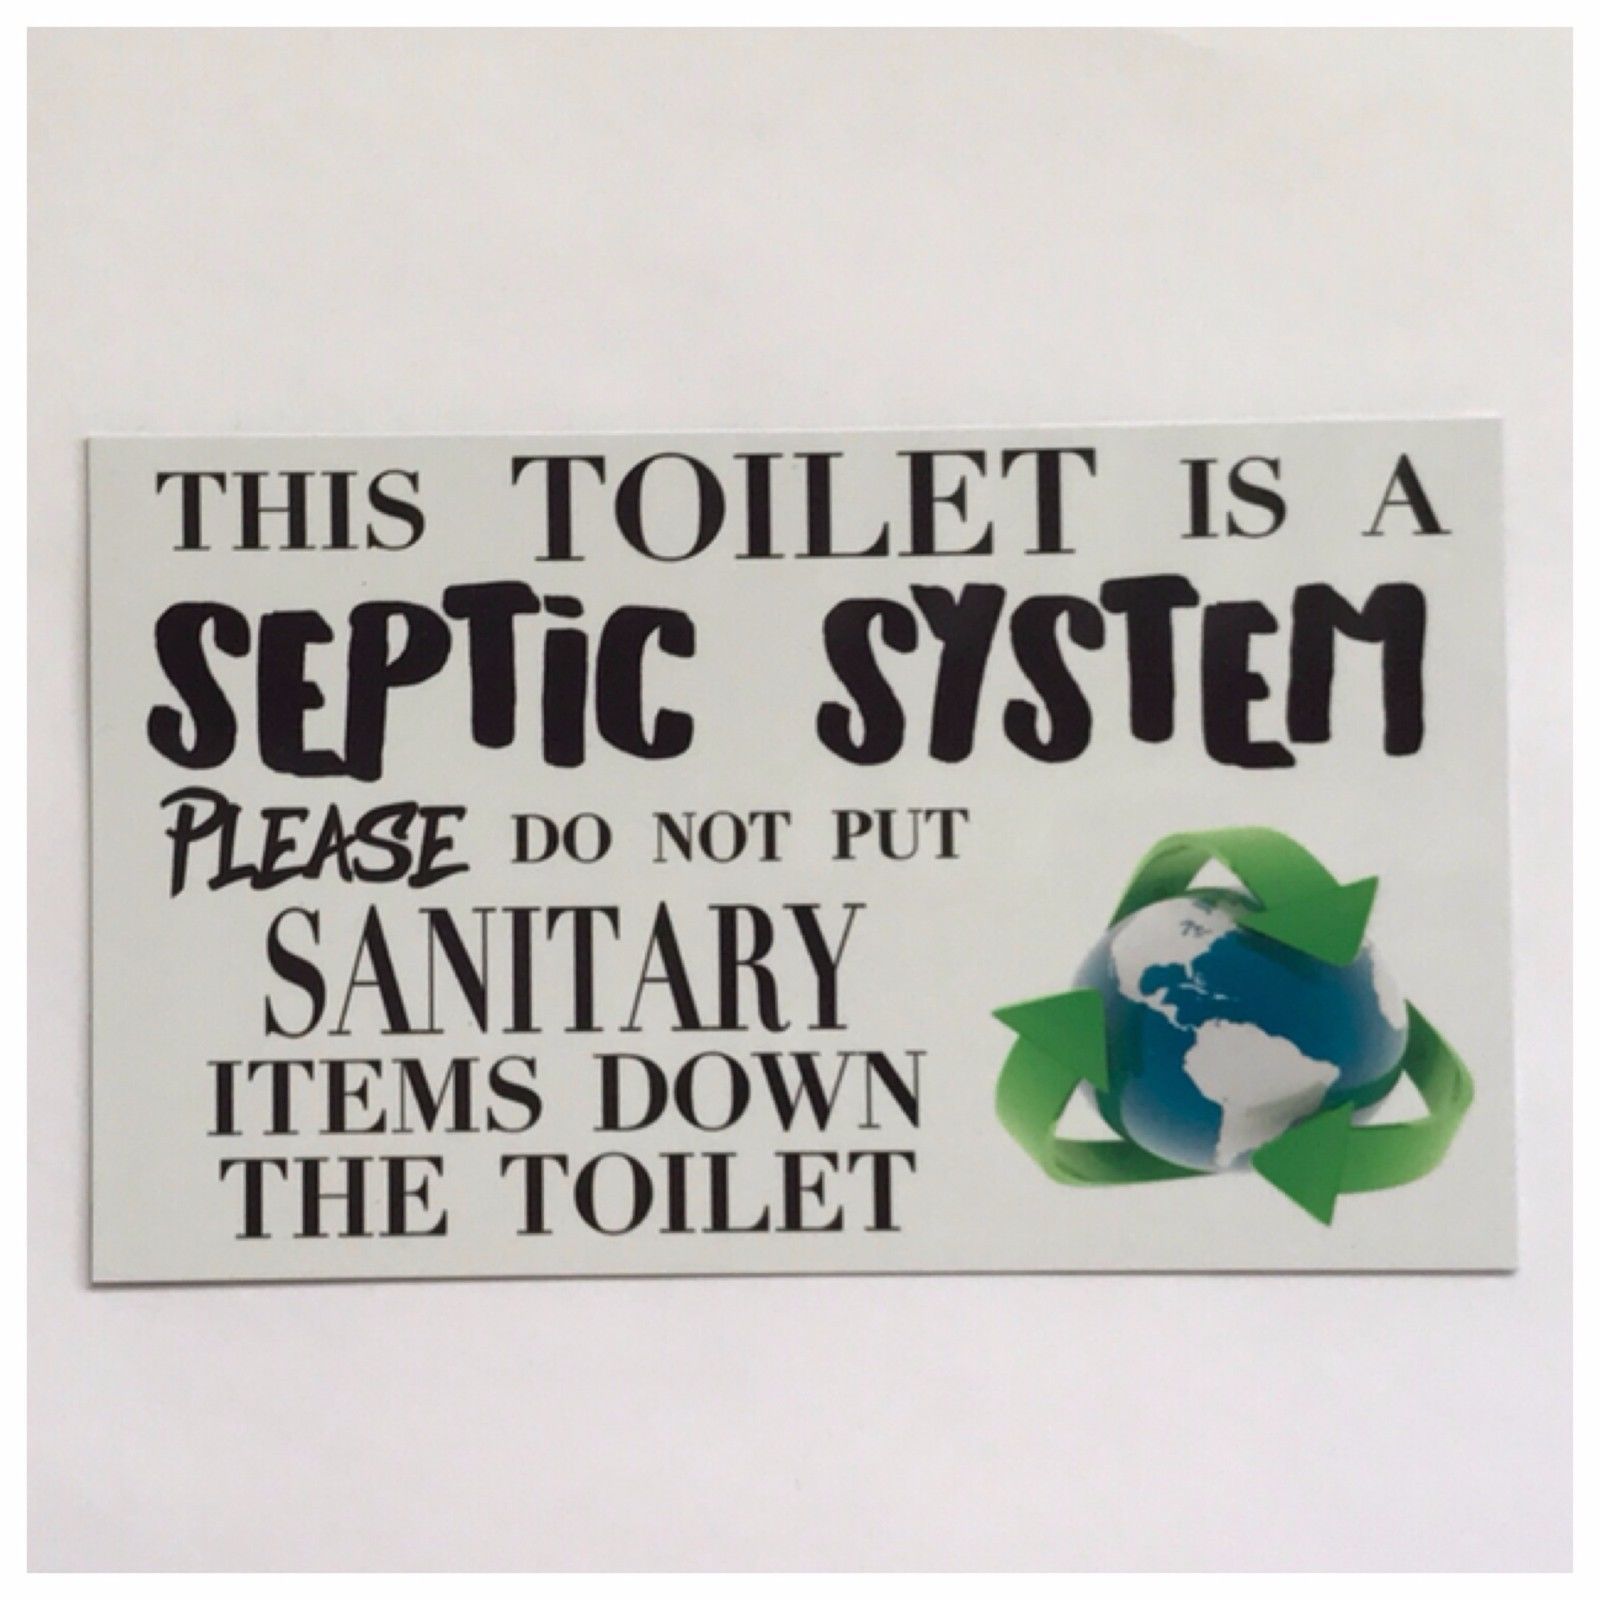 Toilet Septic System Bathroom Sign - The Renmy Store Homewares & Gifts 